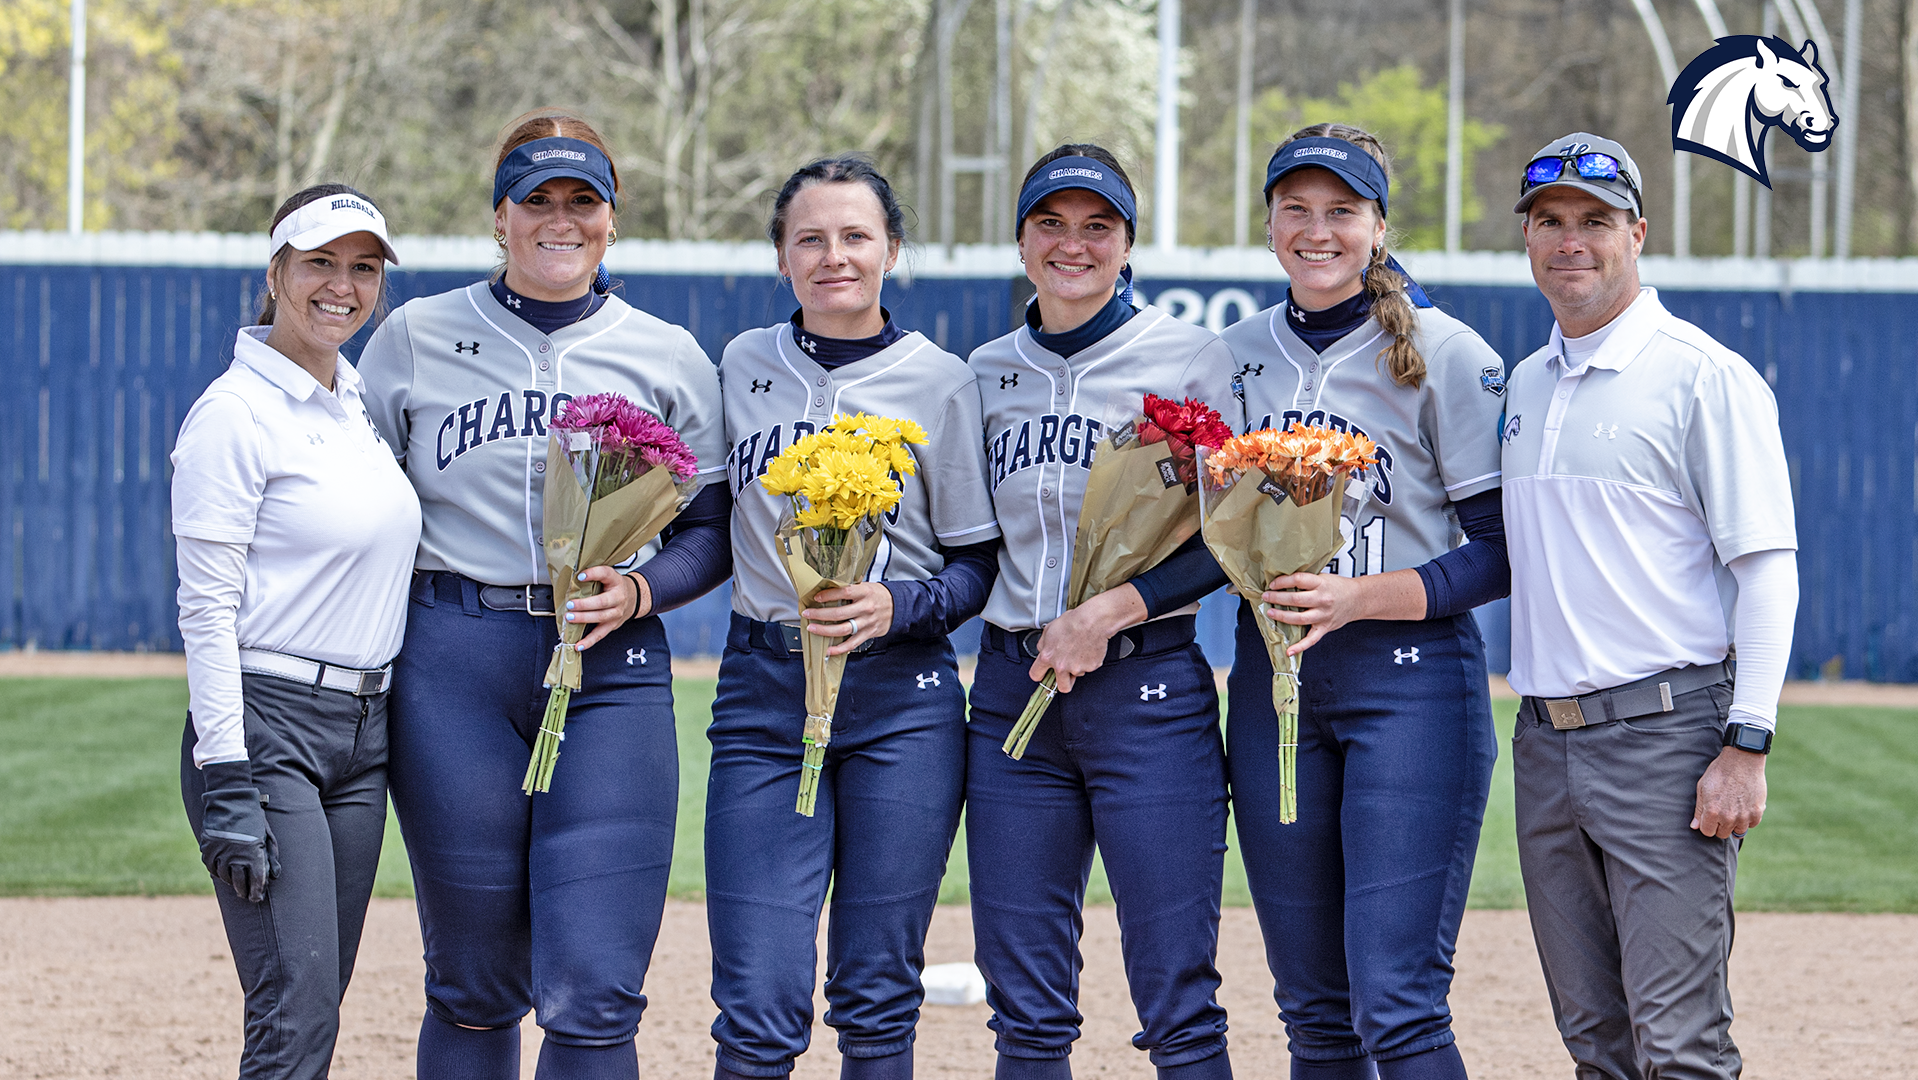 Chargers roll on Senior Day, sweep past Ursuline to run win streak to seven straight